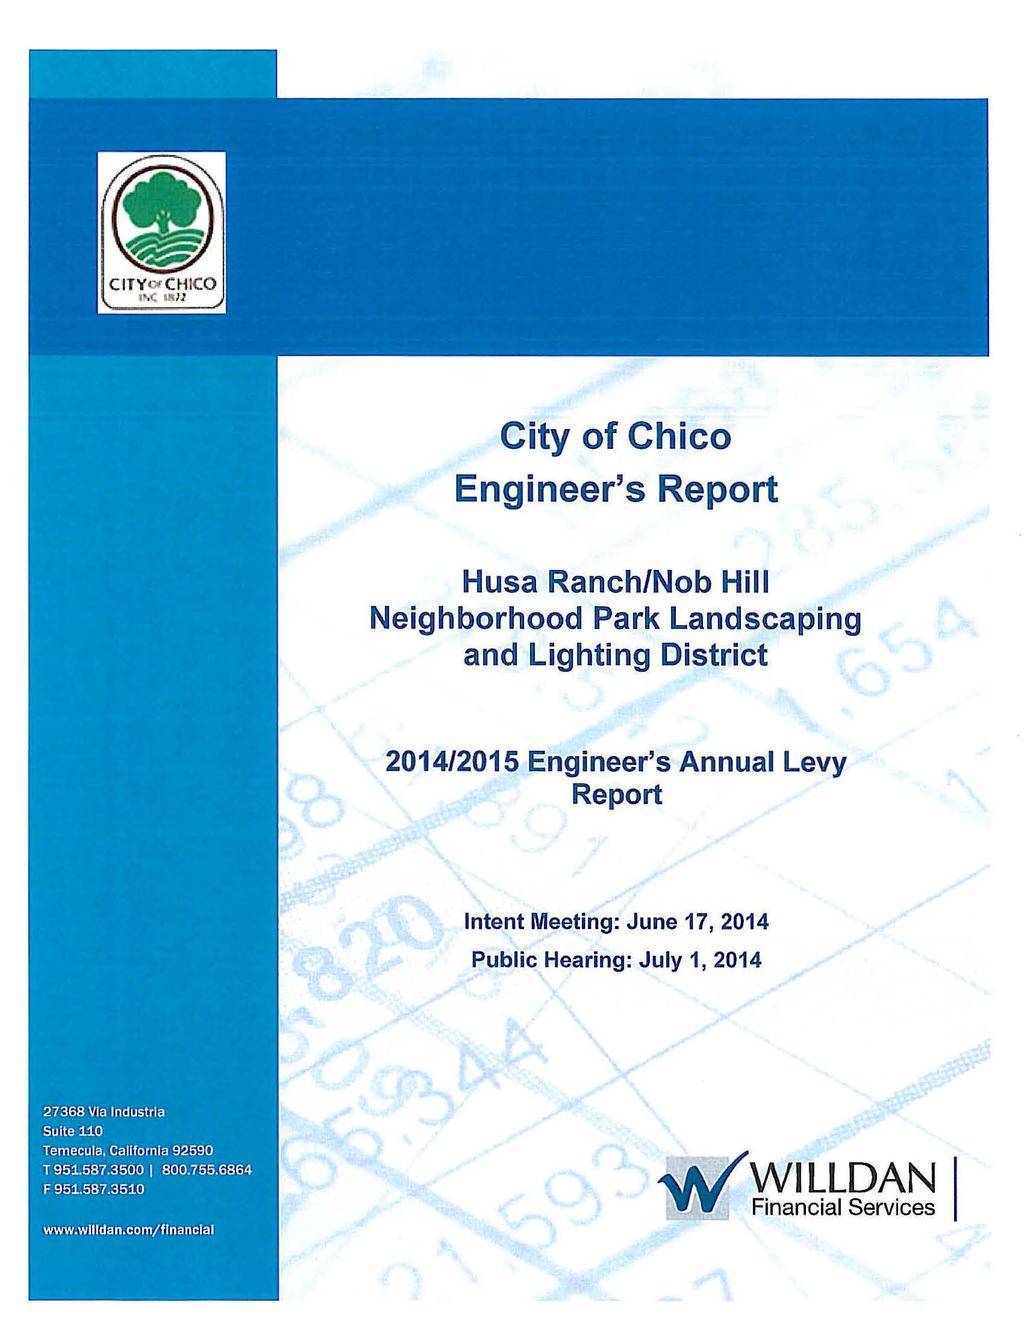 City of Chico Engineer's Report Husa Ranch/Nob Hill Neighborhood Park Landscaping and Lighting